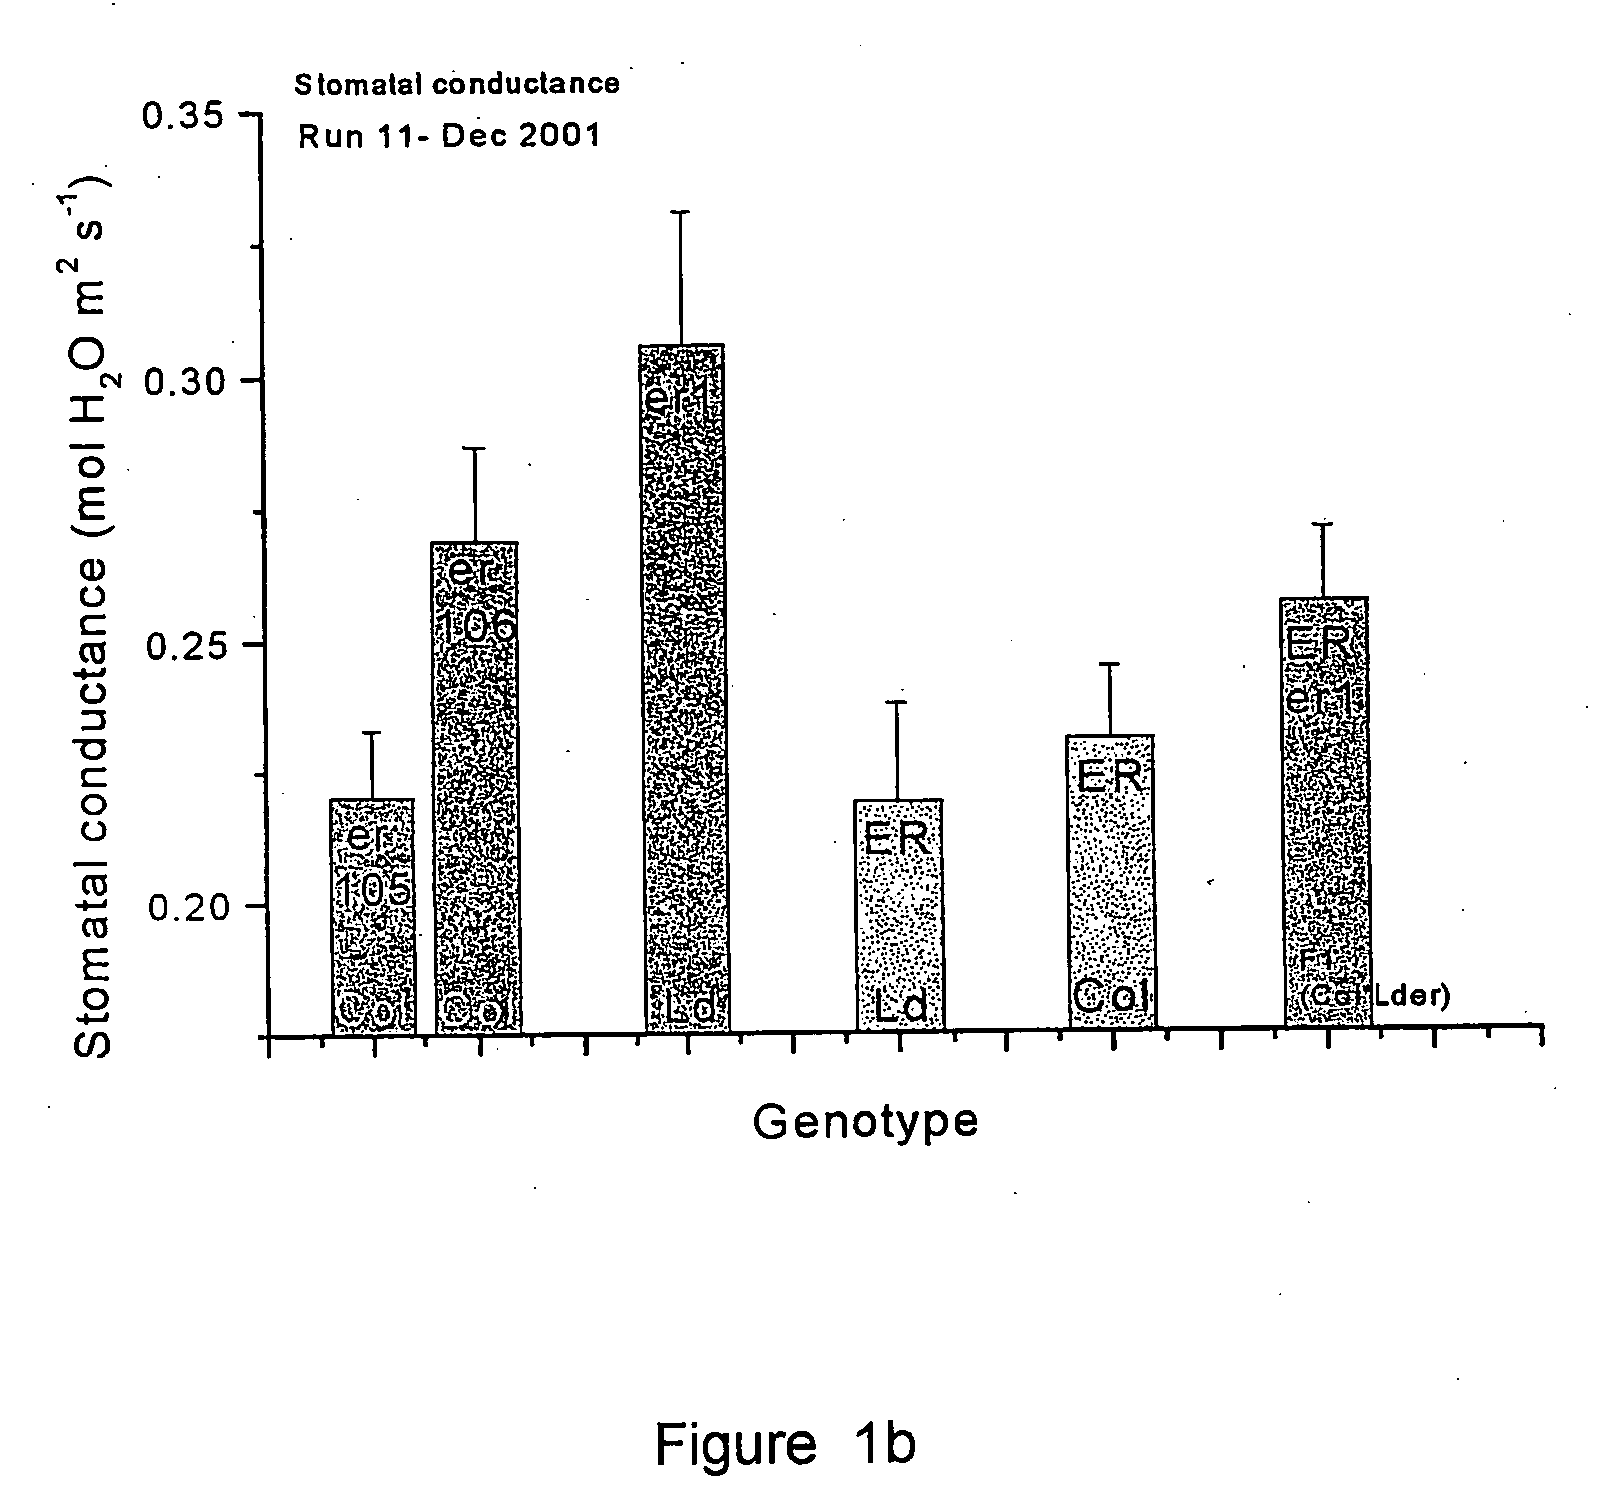 Method of producing plants having enhanced transpiration efficiency and plants produced therefrom